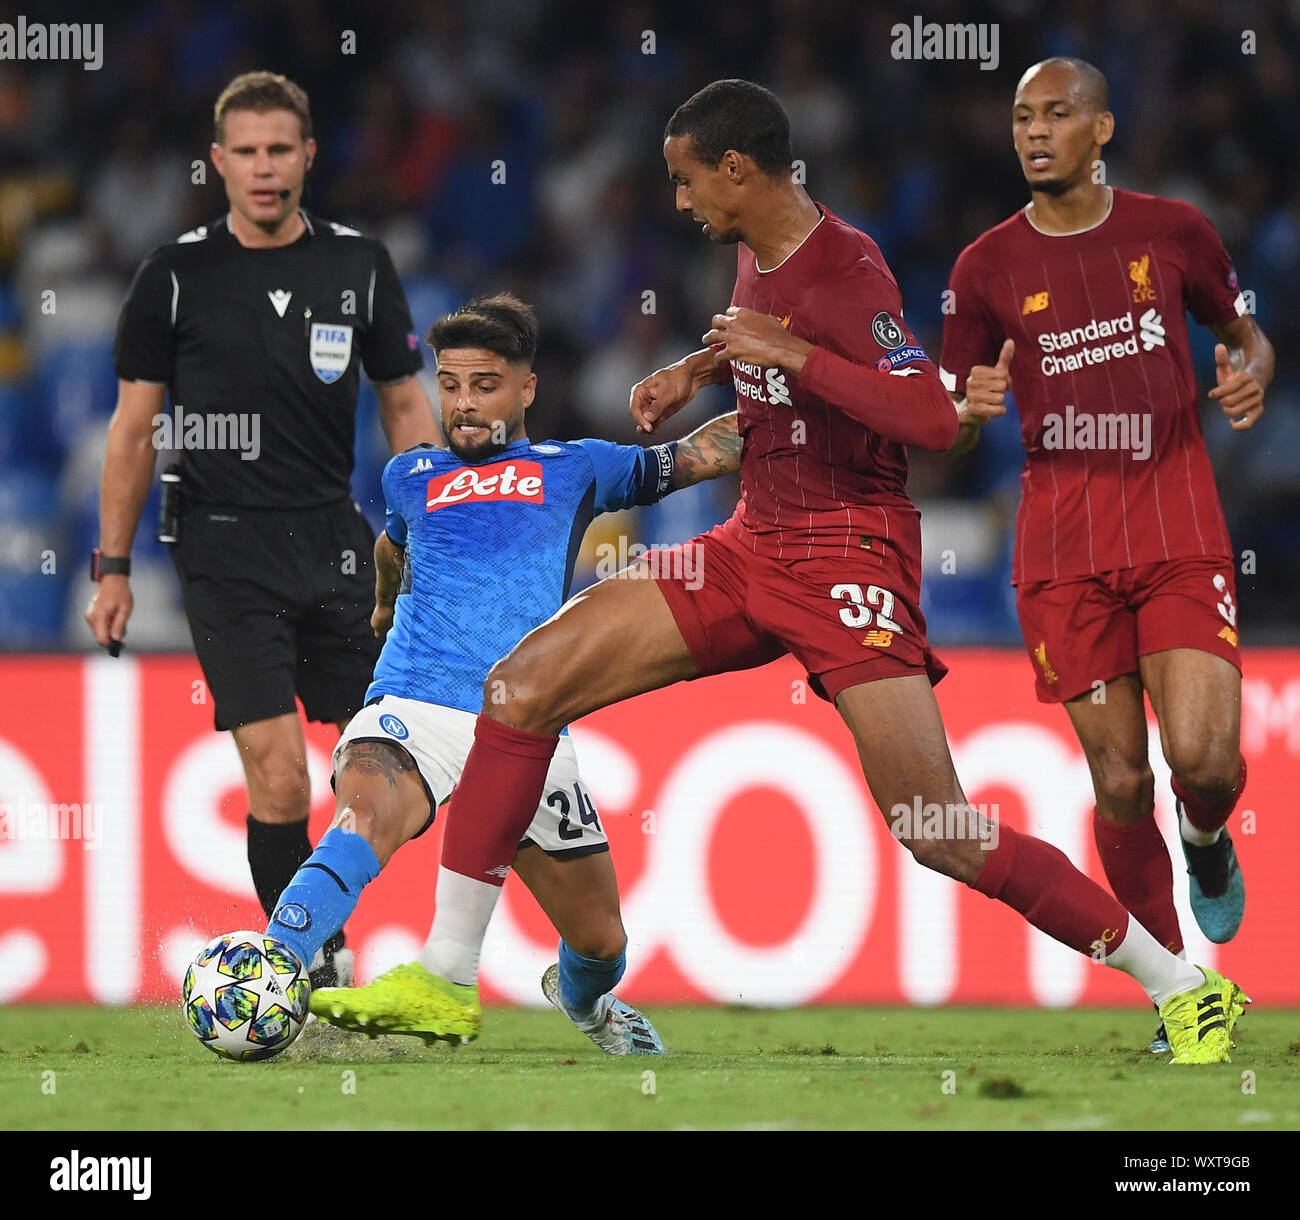 Napoli. 17th Sep, 2019. Napoli's Lorenzo Insigne (2nd L) vies with Liverpool's Joel Matip (2nd R) during the UEFA Champions League Group E match in Napoli, Italy, Sept.17, 2019. Credit: Alberto Lingria/Xinhua/Alamy Live News Stock Photo